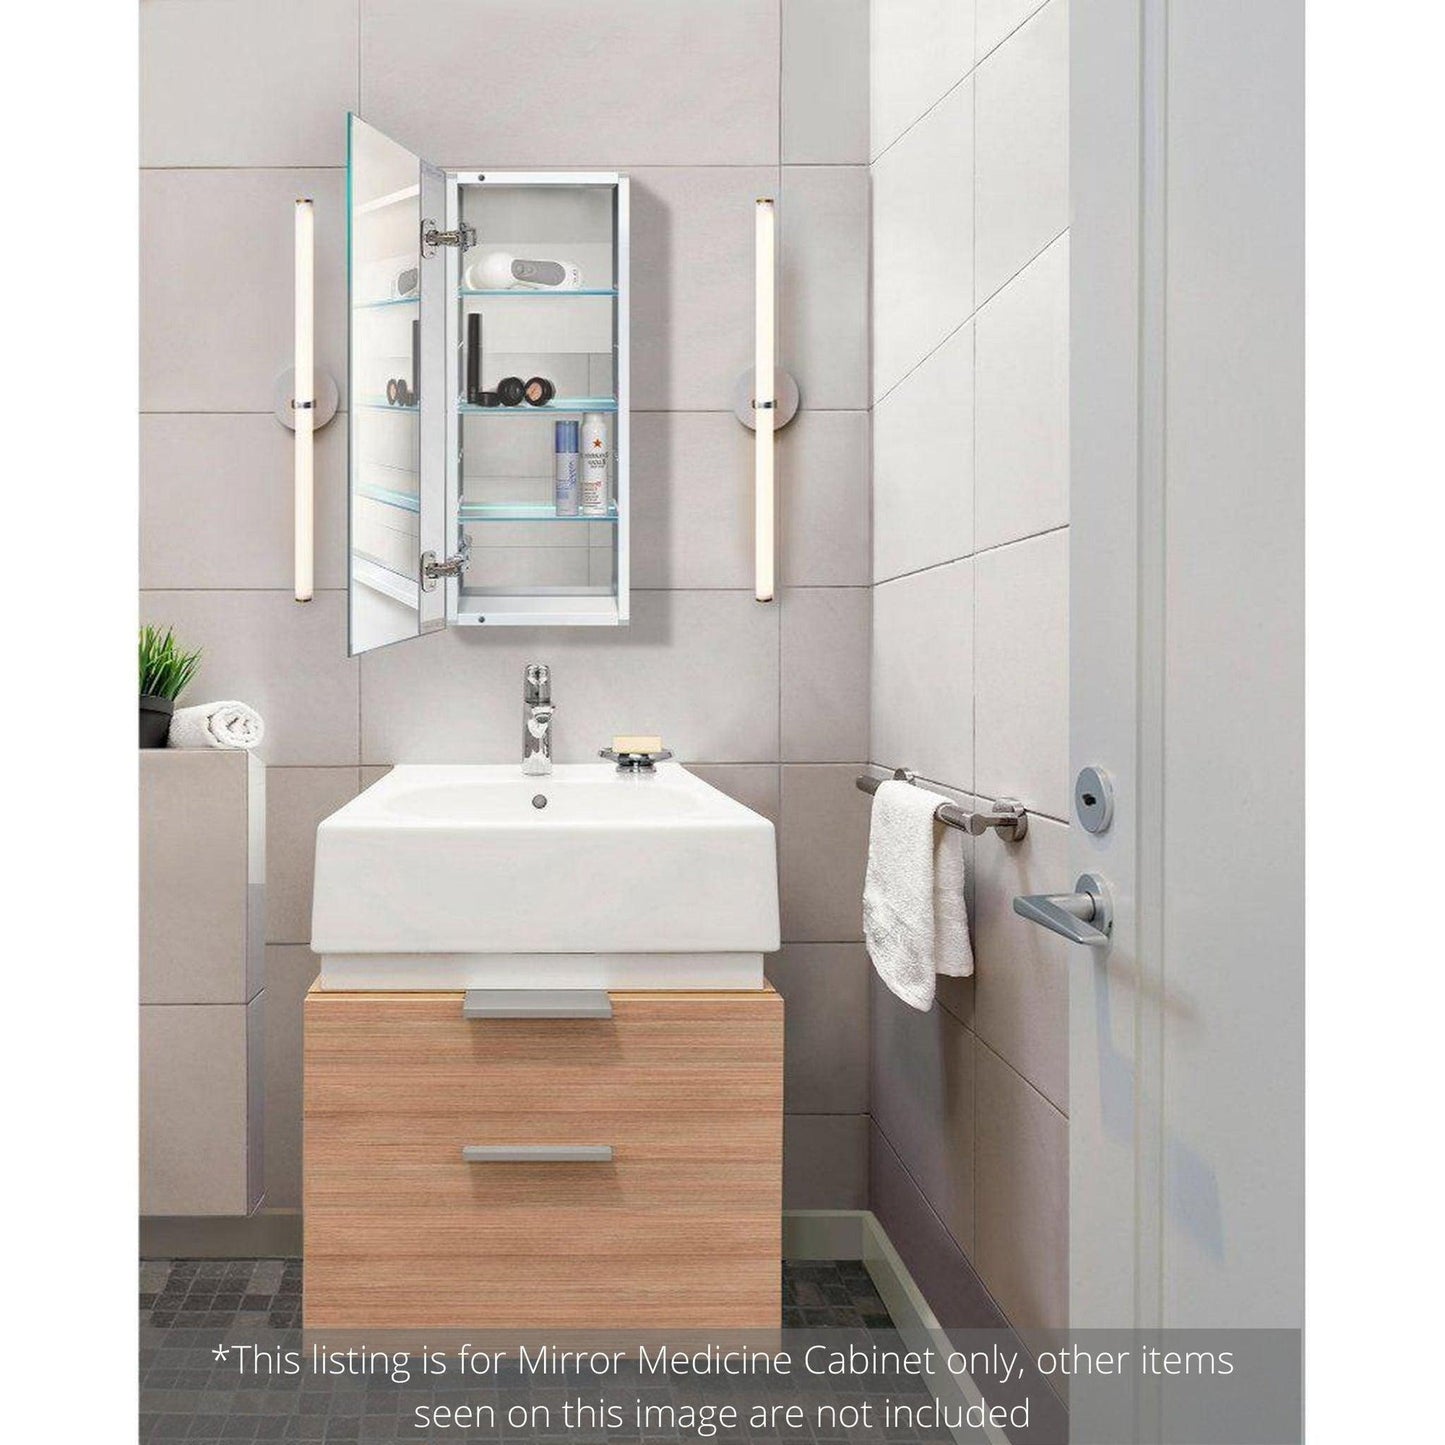 Krugg Reflections Plaza 12" x 30" Single Left Opening Rectangular Recessed/Surface-Mount Medicine Cabinet Mirror With Two Adjustable Shelves